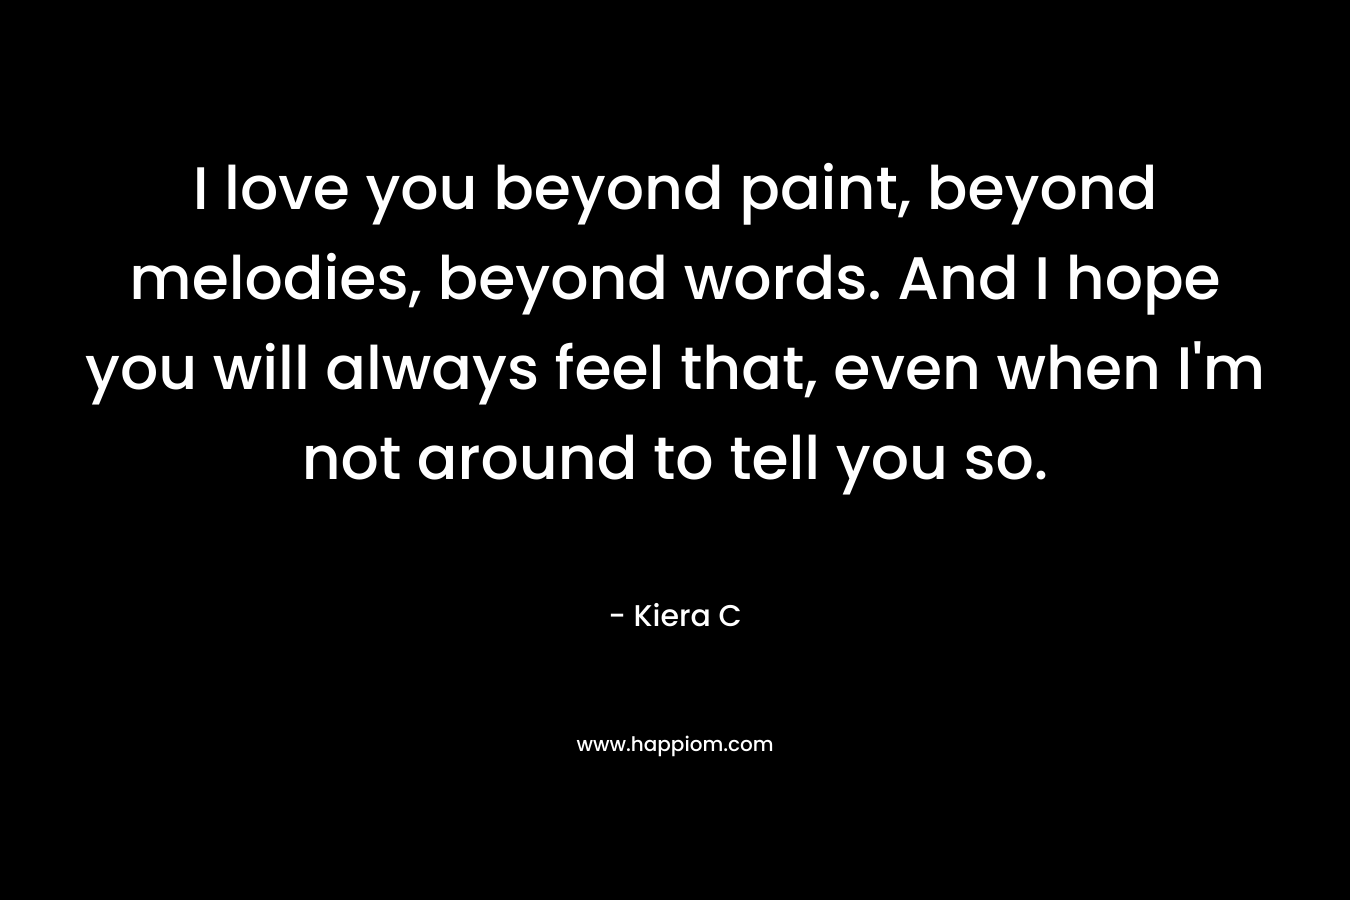 I love you beyond paint, beyond melodies, beyond words. And I hope you will always feel that, even when I'm not around to tell you so.